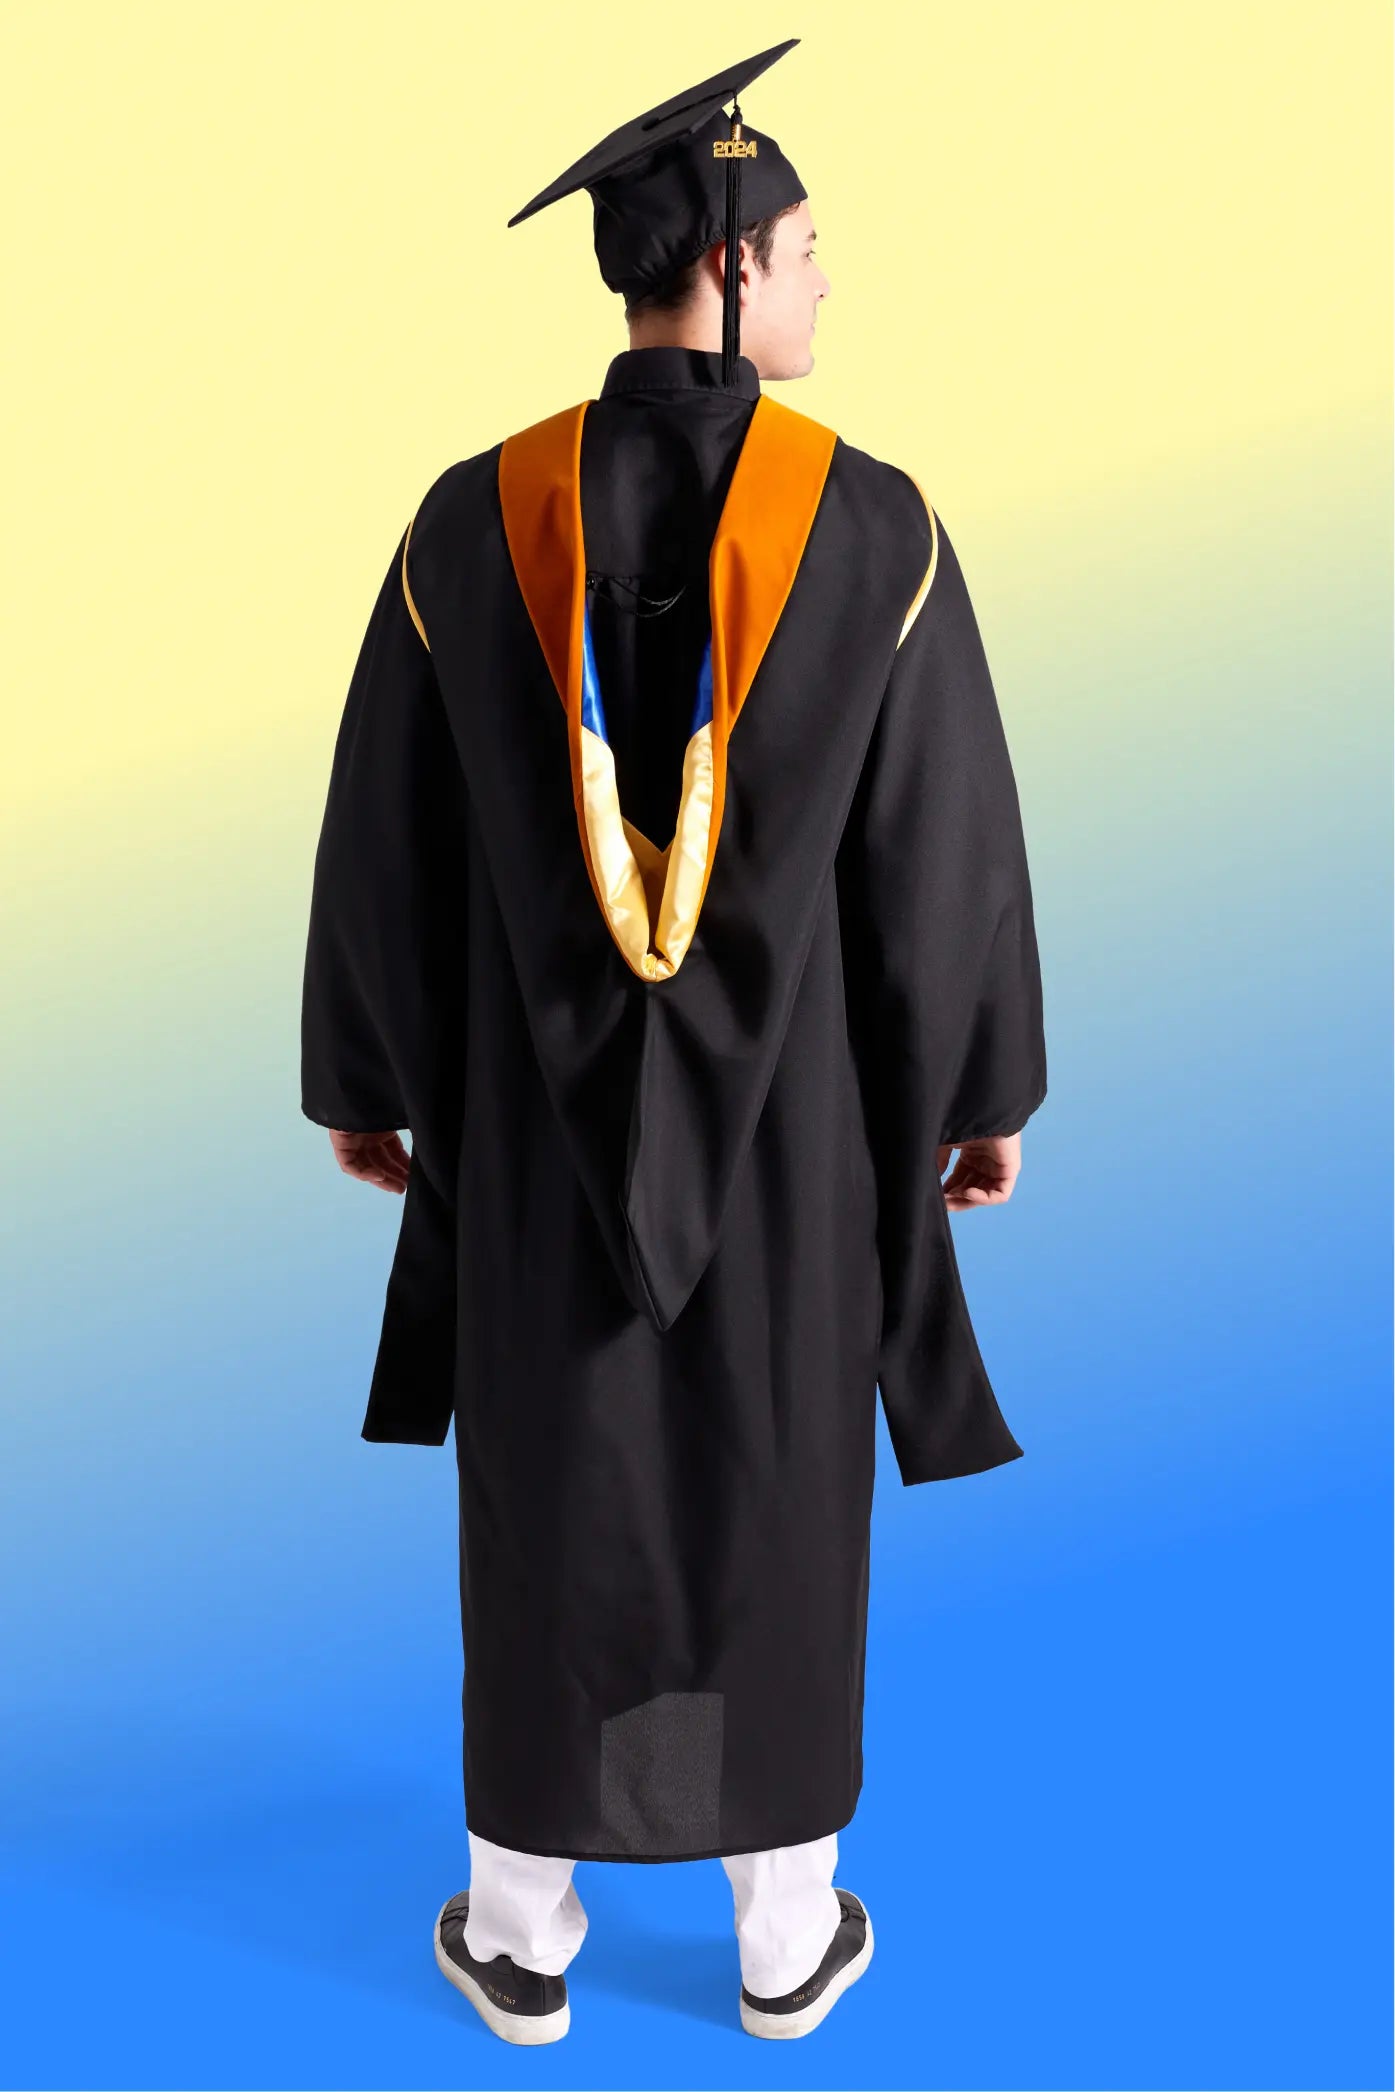 HAPPY TASSEL | UC Riverside Master's Regalia Set, include bachelors gown with pockets, mortarboard cap, and tassel with year charm.